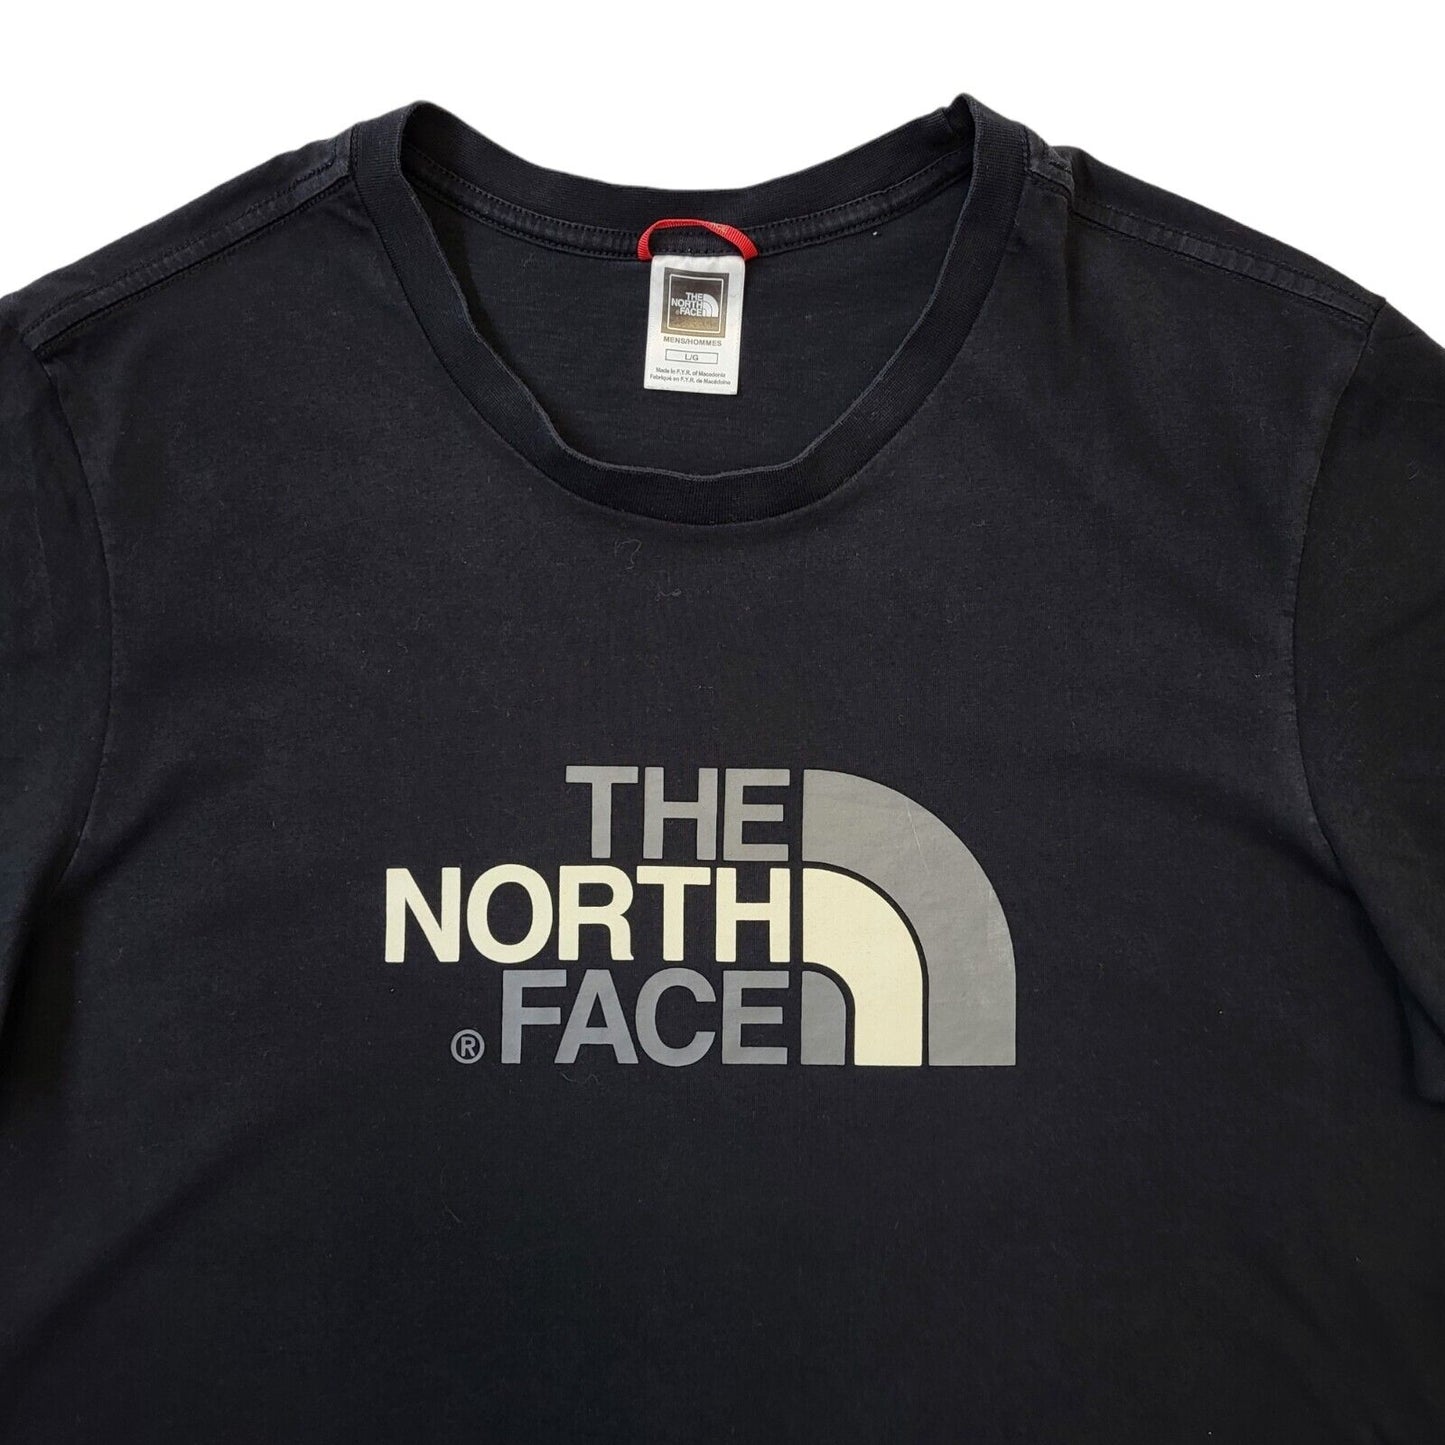 The North Face T-Shirt (L)